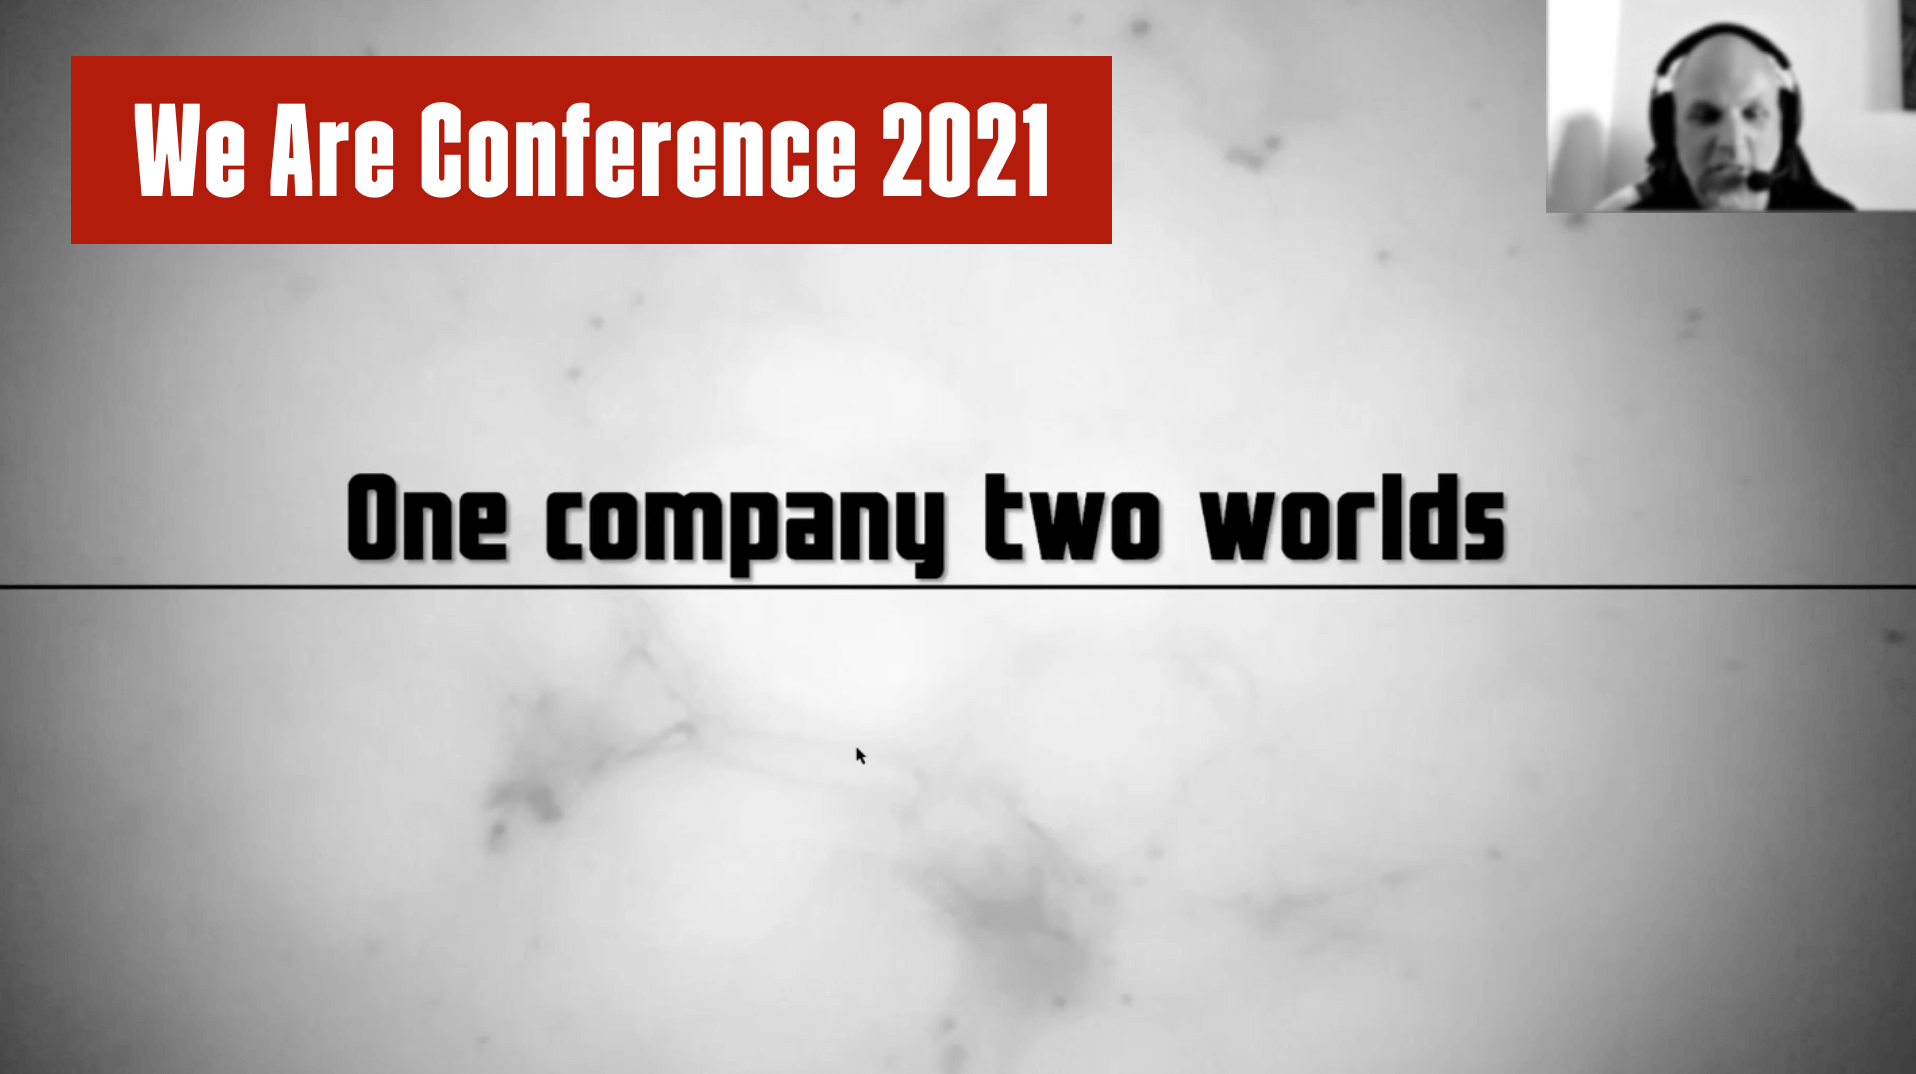 Video: “One company, two different worlds”